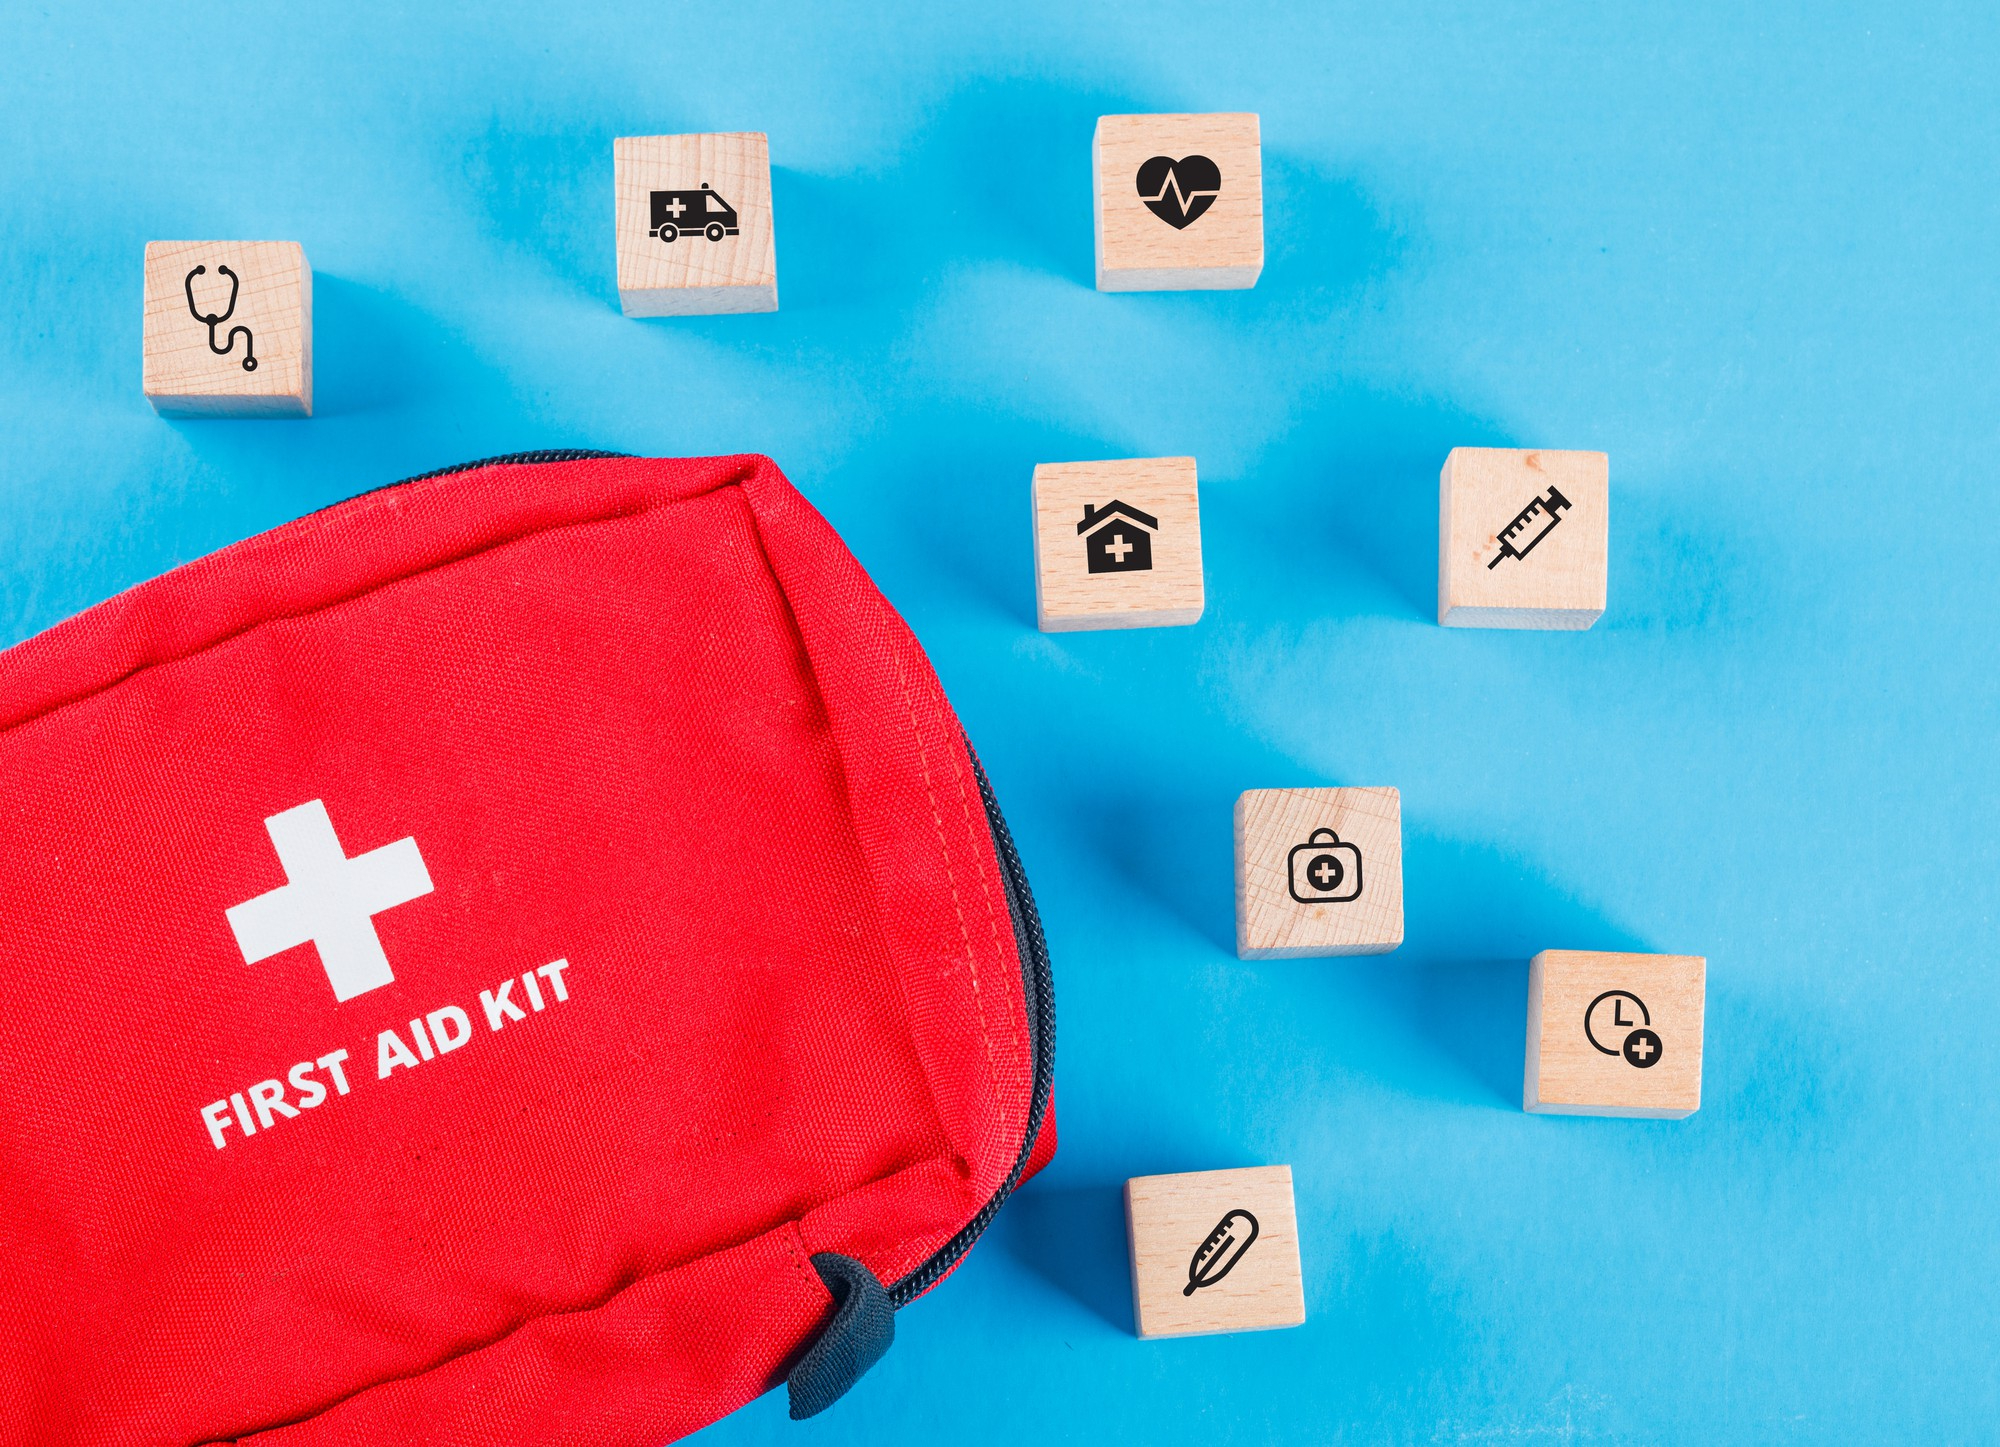 medical-concept-with-wooden-blocks-with-icons-first-aid-bag-blue-table-flat-lay (1)